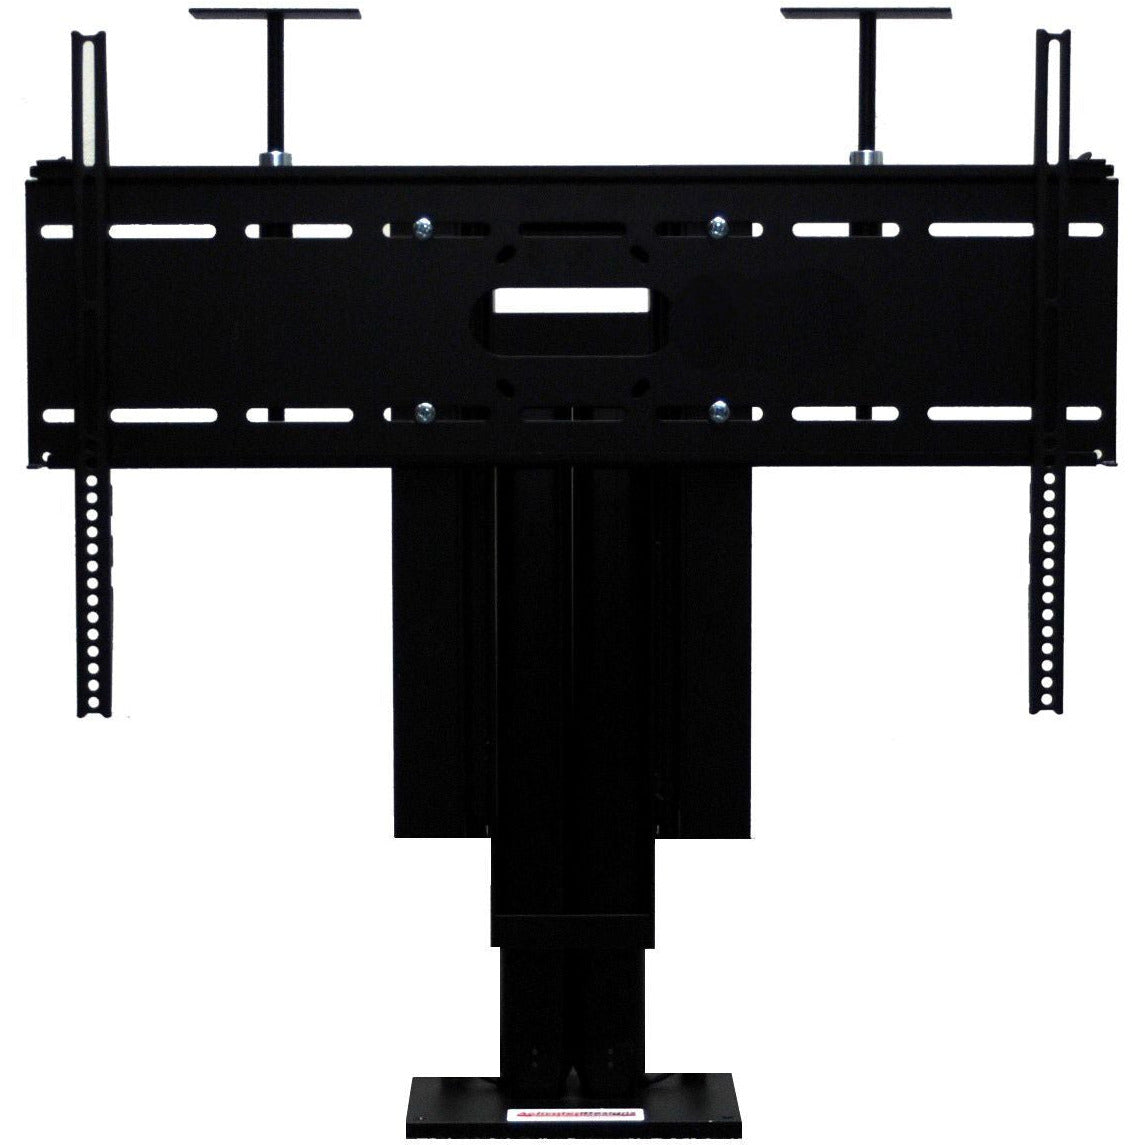 Cabinet Mounted Lift-Swivel For a 70 Inch TV - Capacity 300 Pounds -Travel: 38 Inches -TP-38-30-PS-70 - Auton Motorized Systems